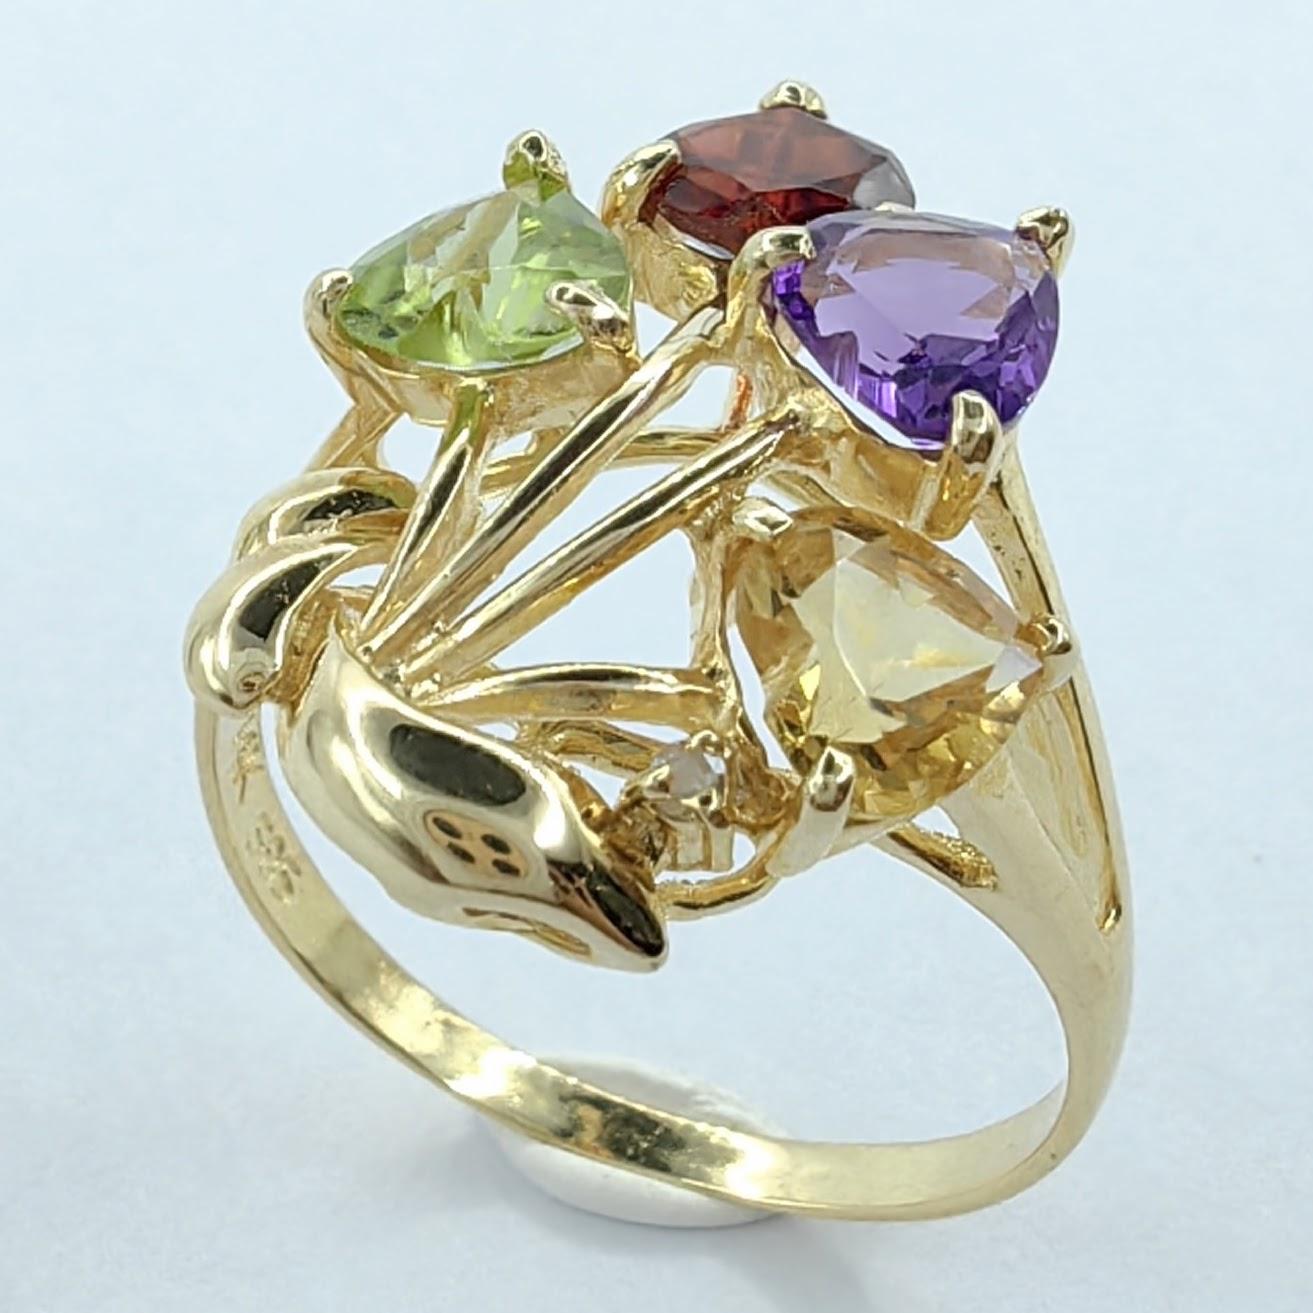 Introducing our captivating Heart Shaped Amethyst, Citrine, Garnet, Peridot Flower Bouquet Ring in 14K Gold. This exquisite ring showcases a stunning arrangement of heart-cut gemstones, each radiating its own vibrant color and carrying symbolic